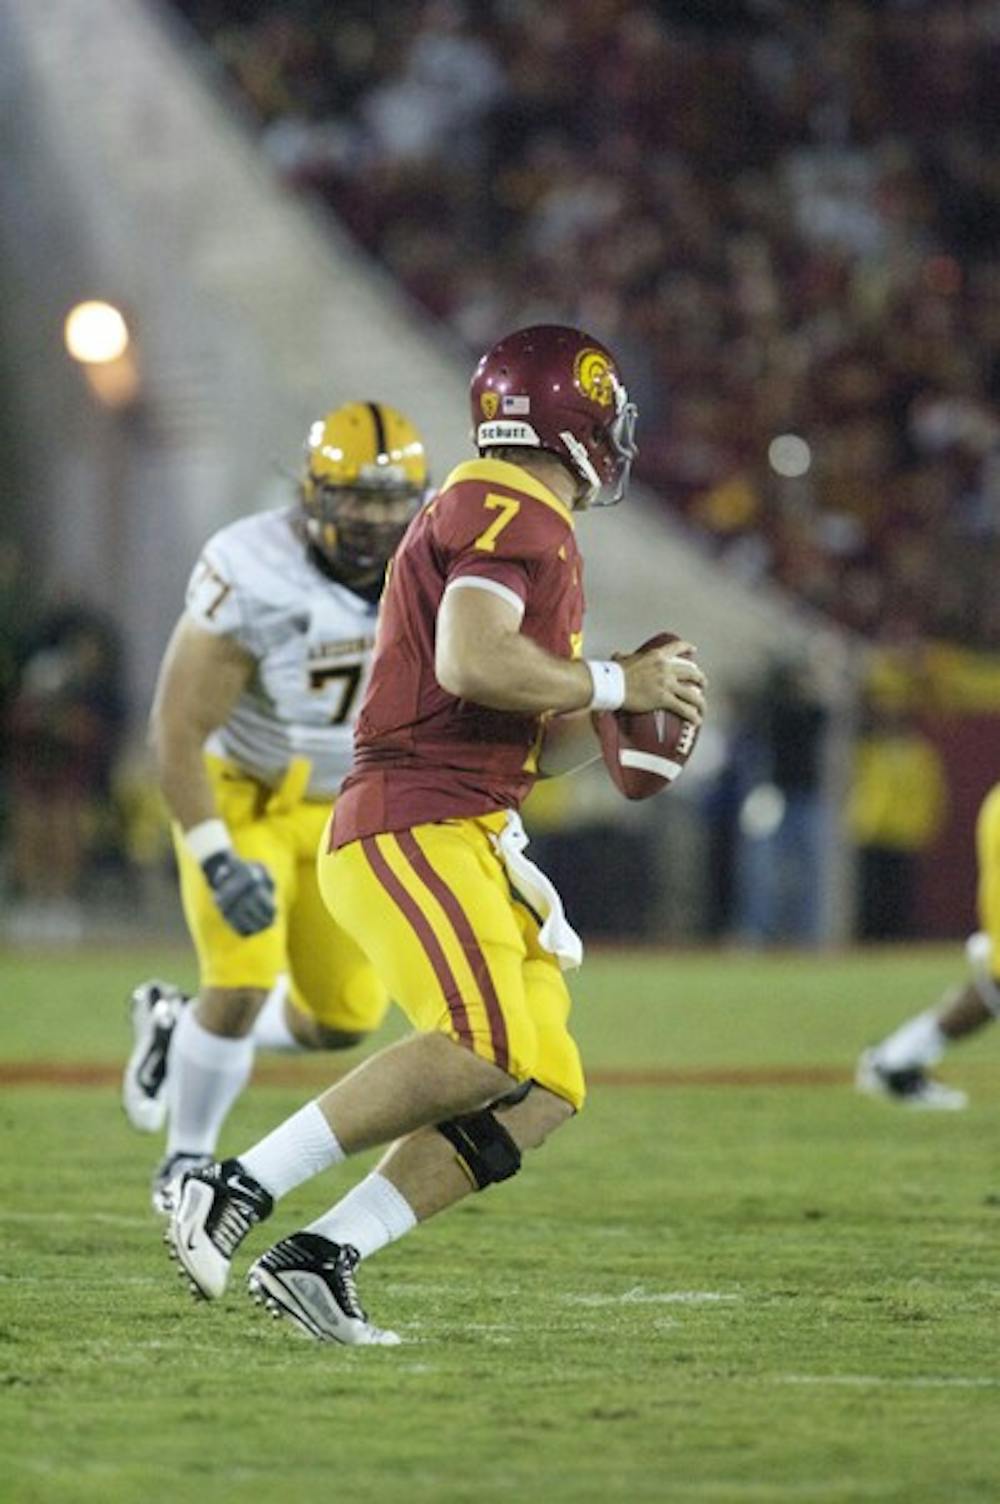 READY FOR BATTLE: USC junior quarterback Matt Barkley drops back and looks for a receiver during the Sun Devils’ loss to the Trojans in Tempe last season. USC is wary but looking for the win against ASU. (Photo by Aaron Lavinksy)